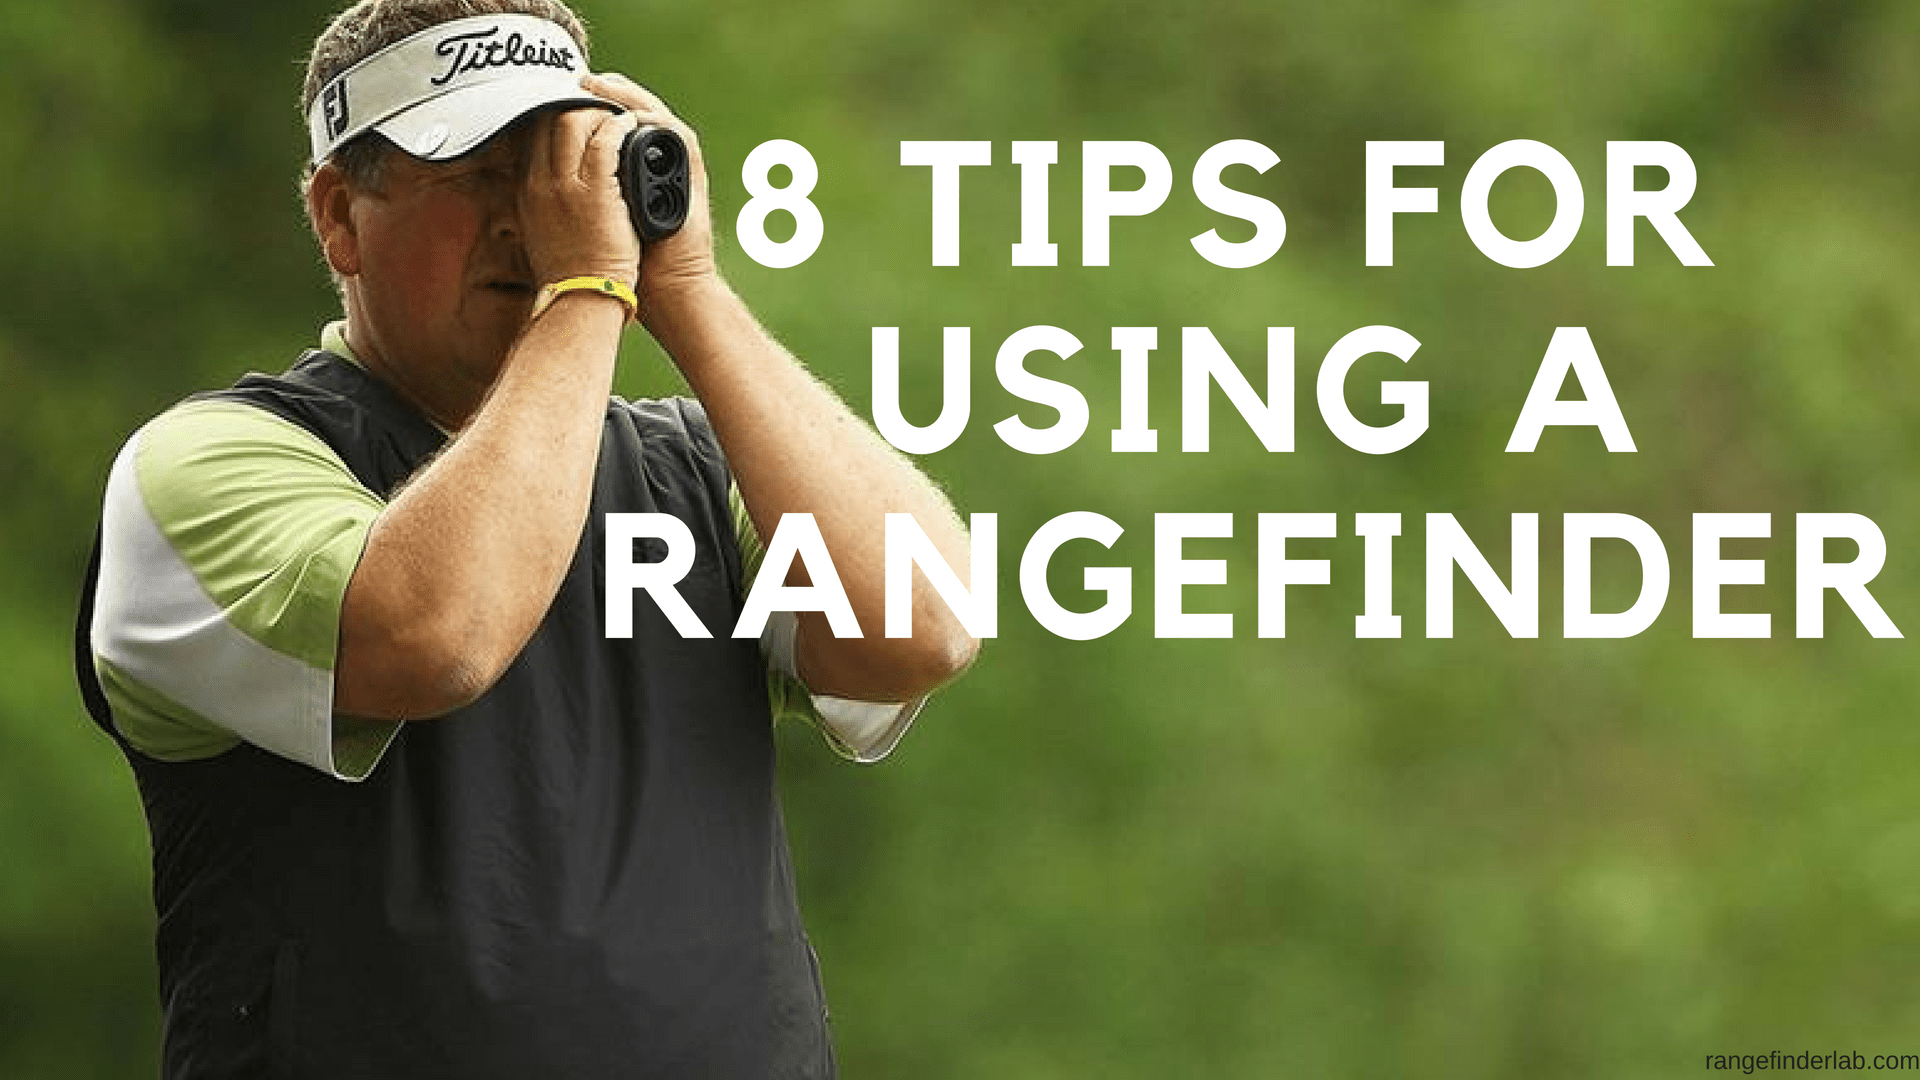 How To Use A Rangefinder